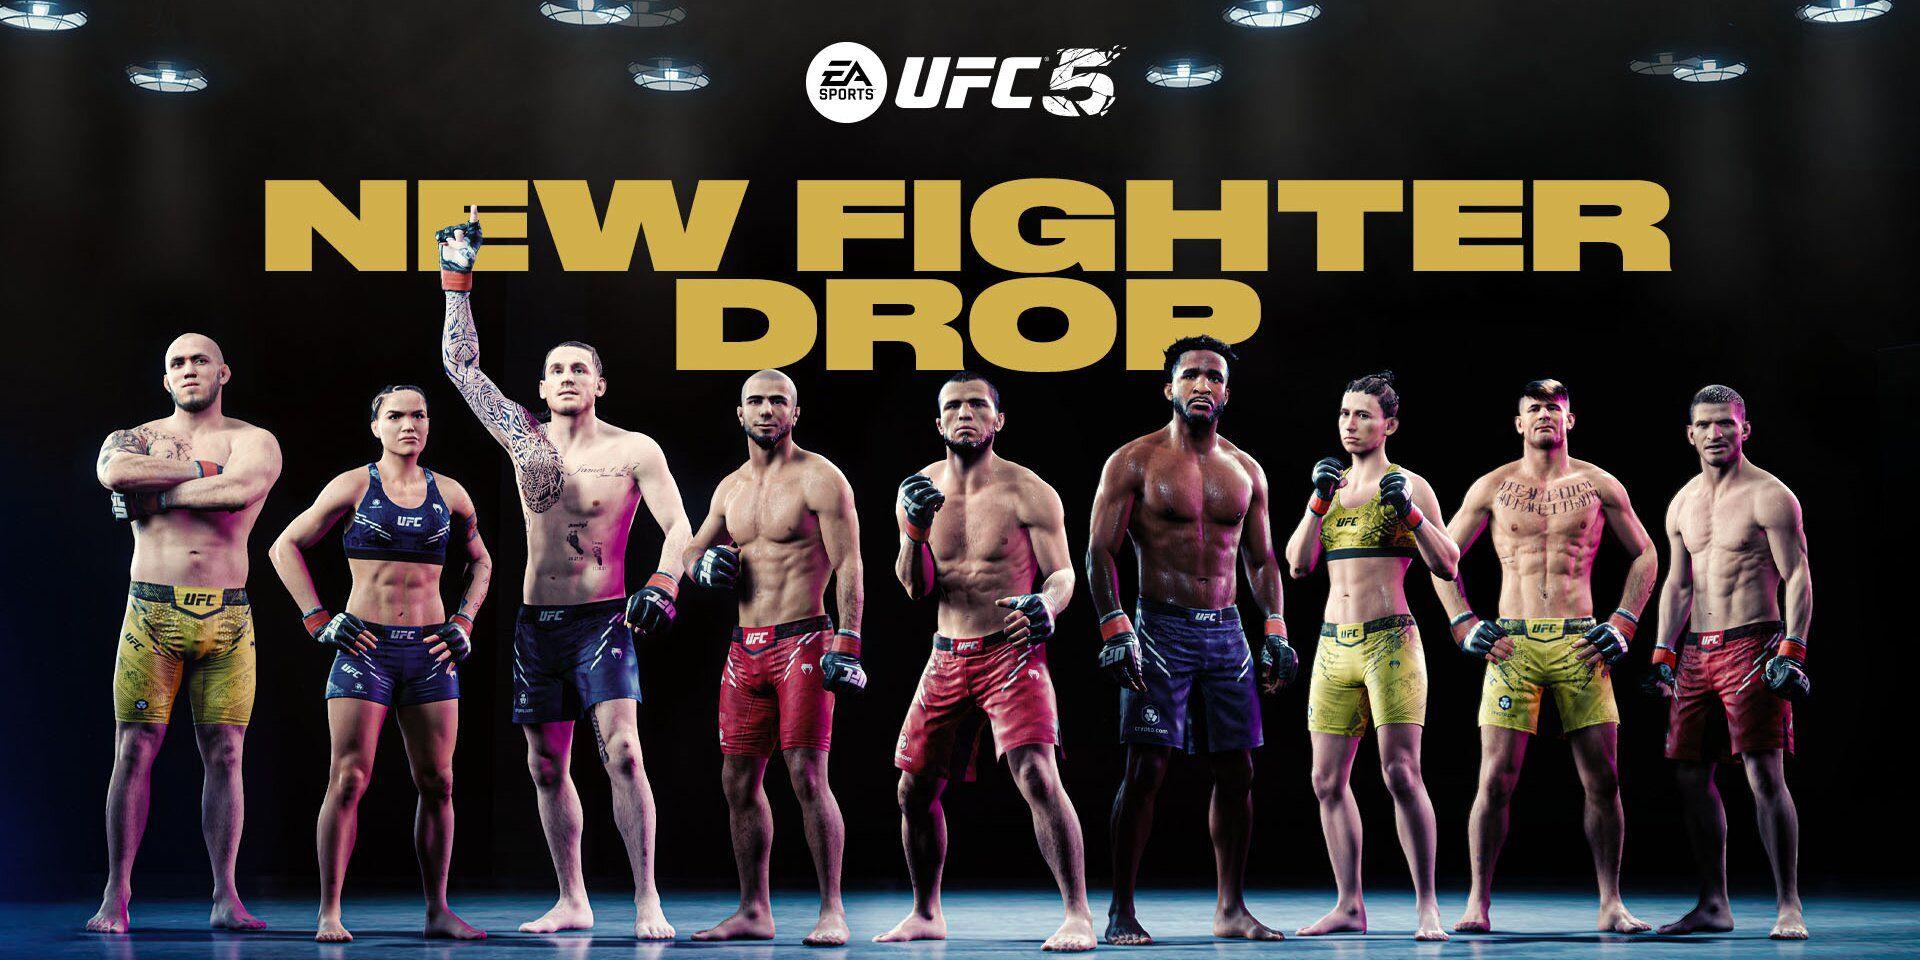 UFC 5 is getting massive roster updates